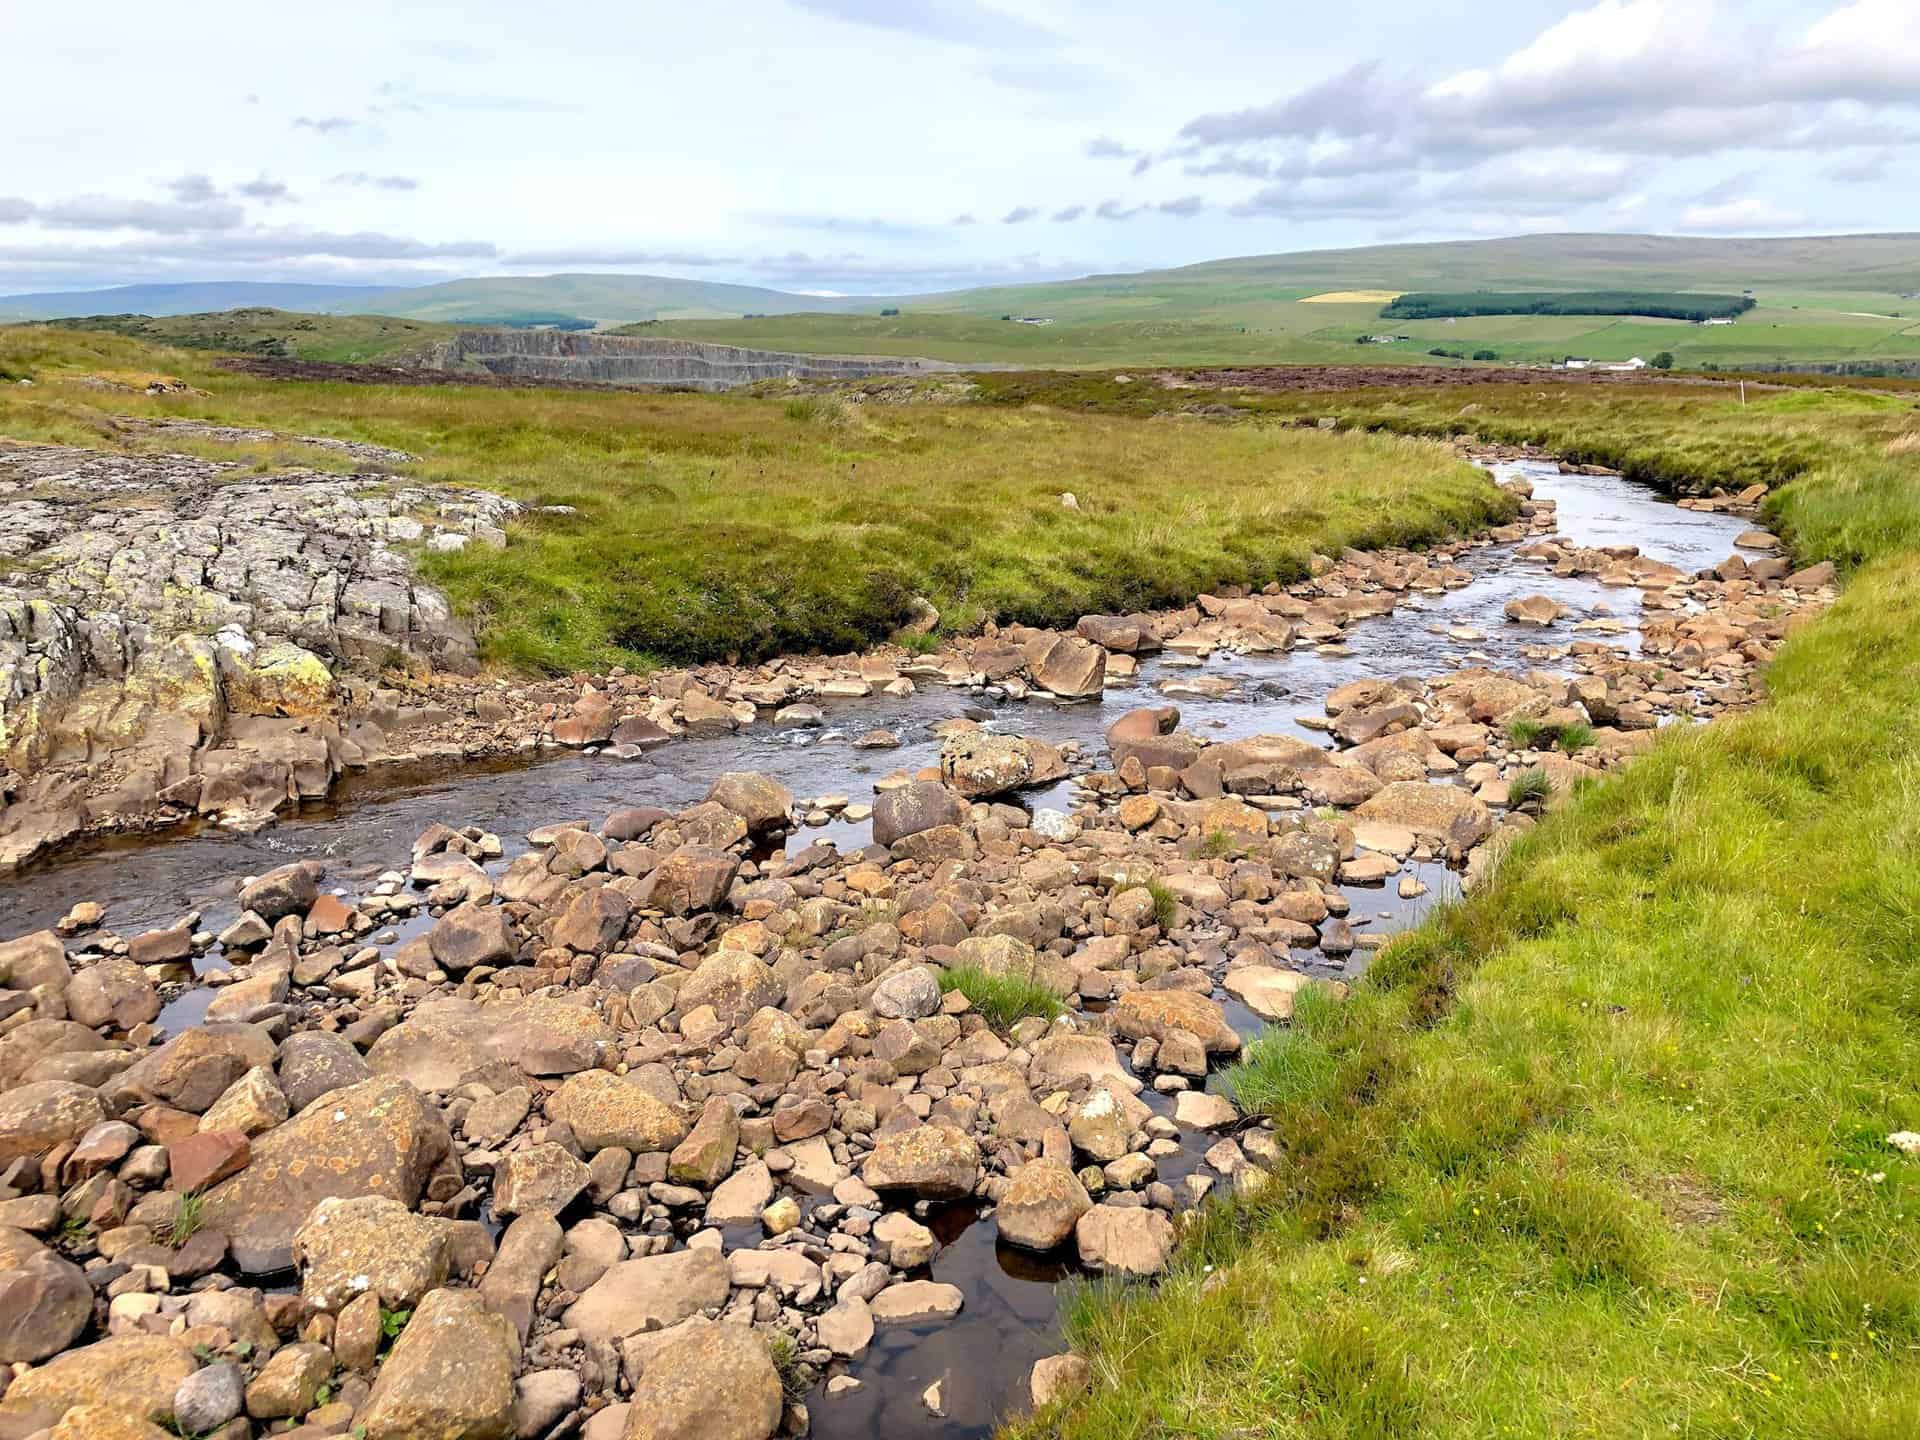 Blea Beck, set to join the River Tees later on, meanders through the countryside.